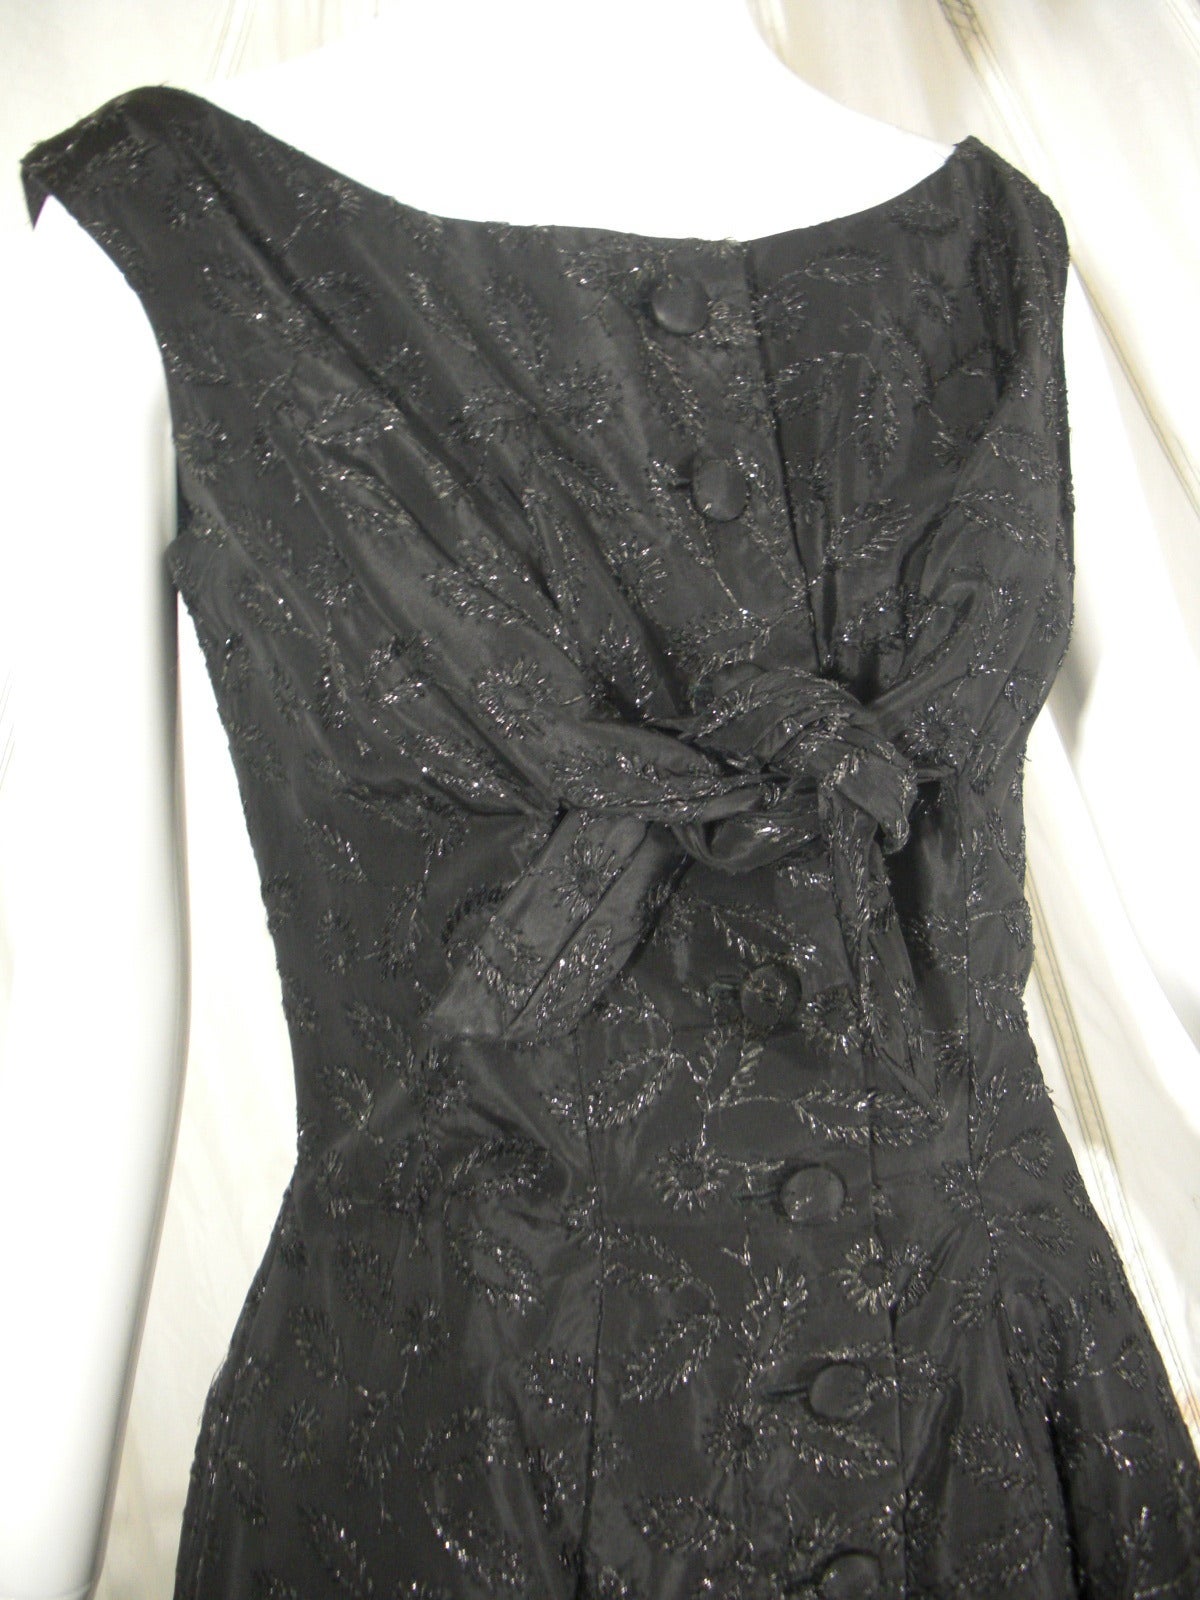 1950s Suzy Perette Black Button Front Dress with Embroidered Flowers 1